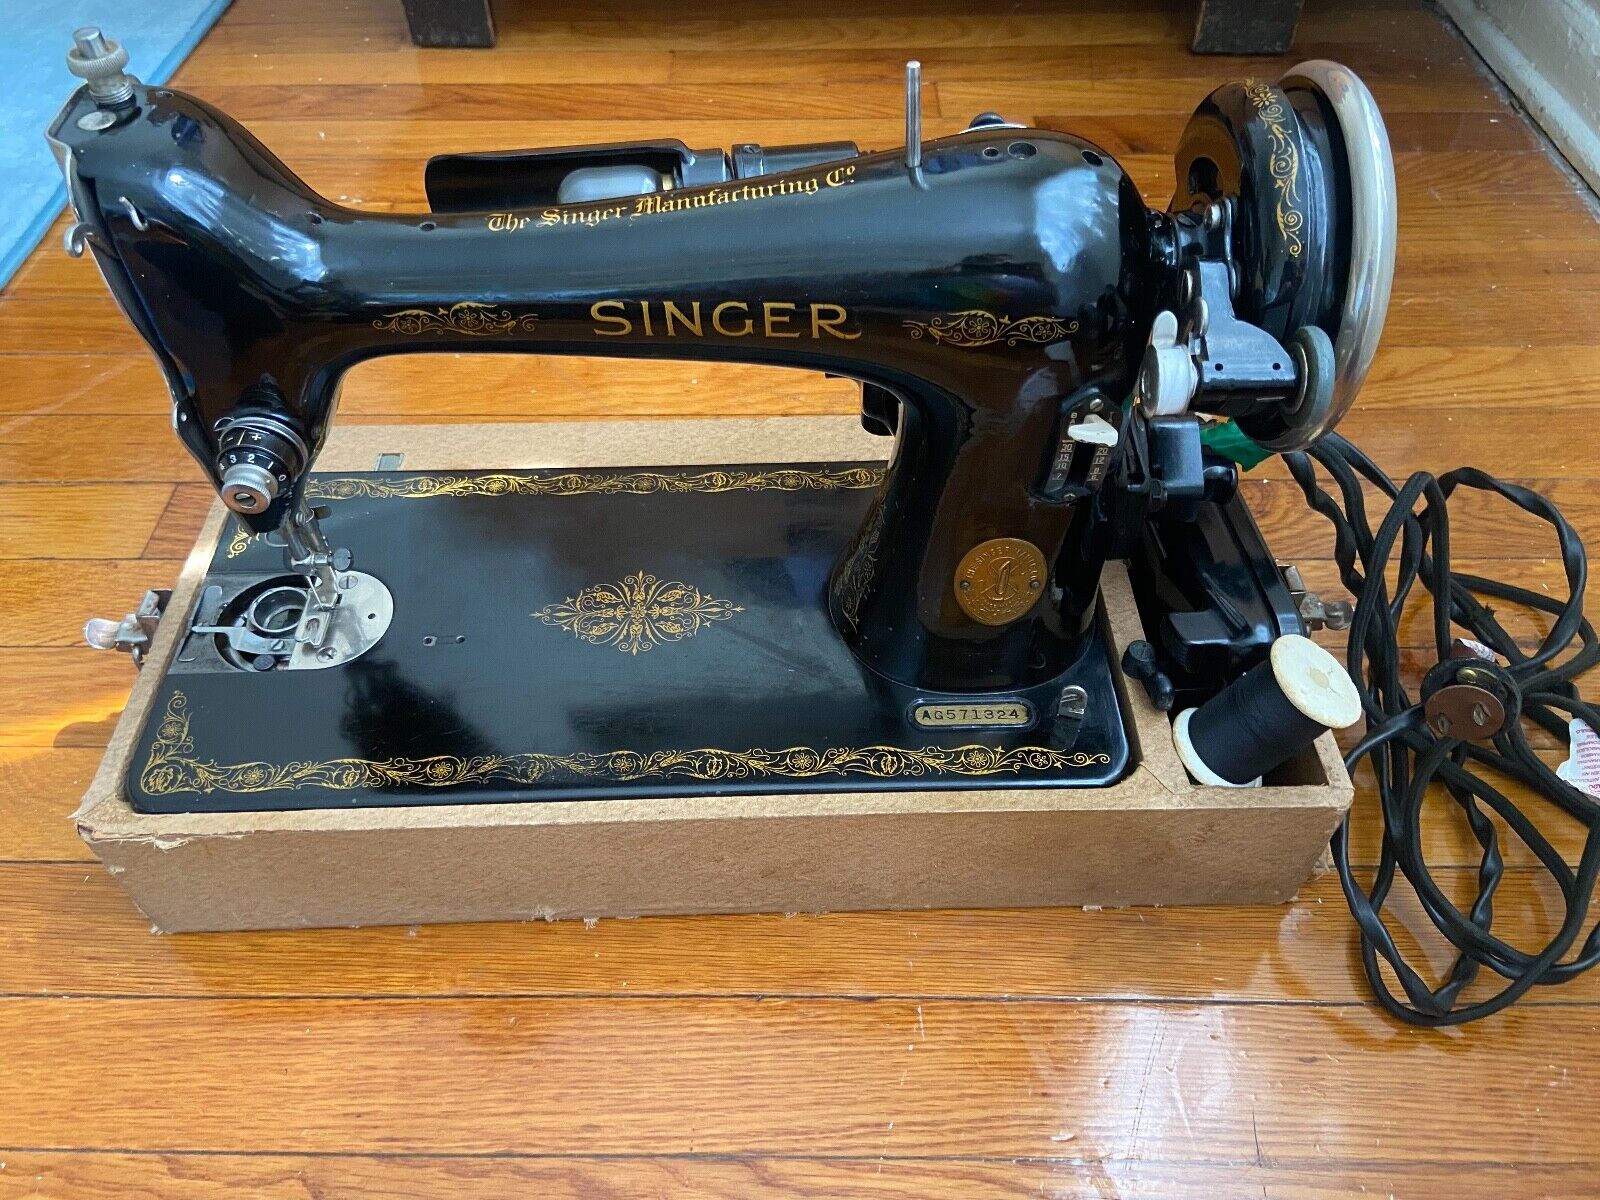 New Acquisition: Singer Industrial Sewing Machine, ca. 1972